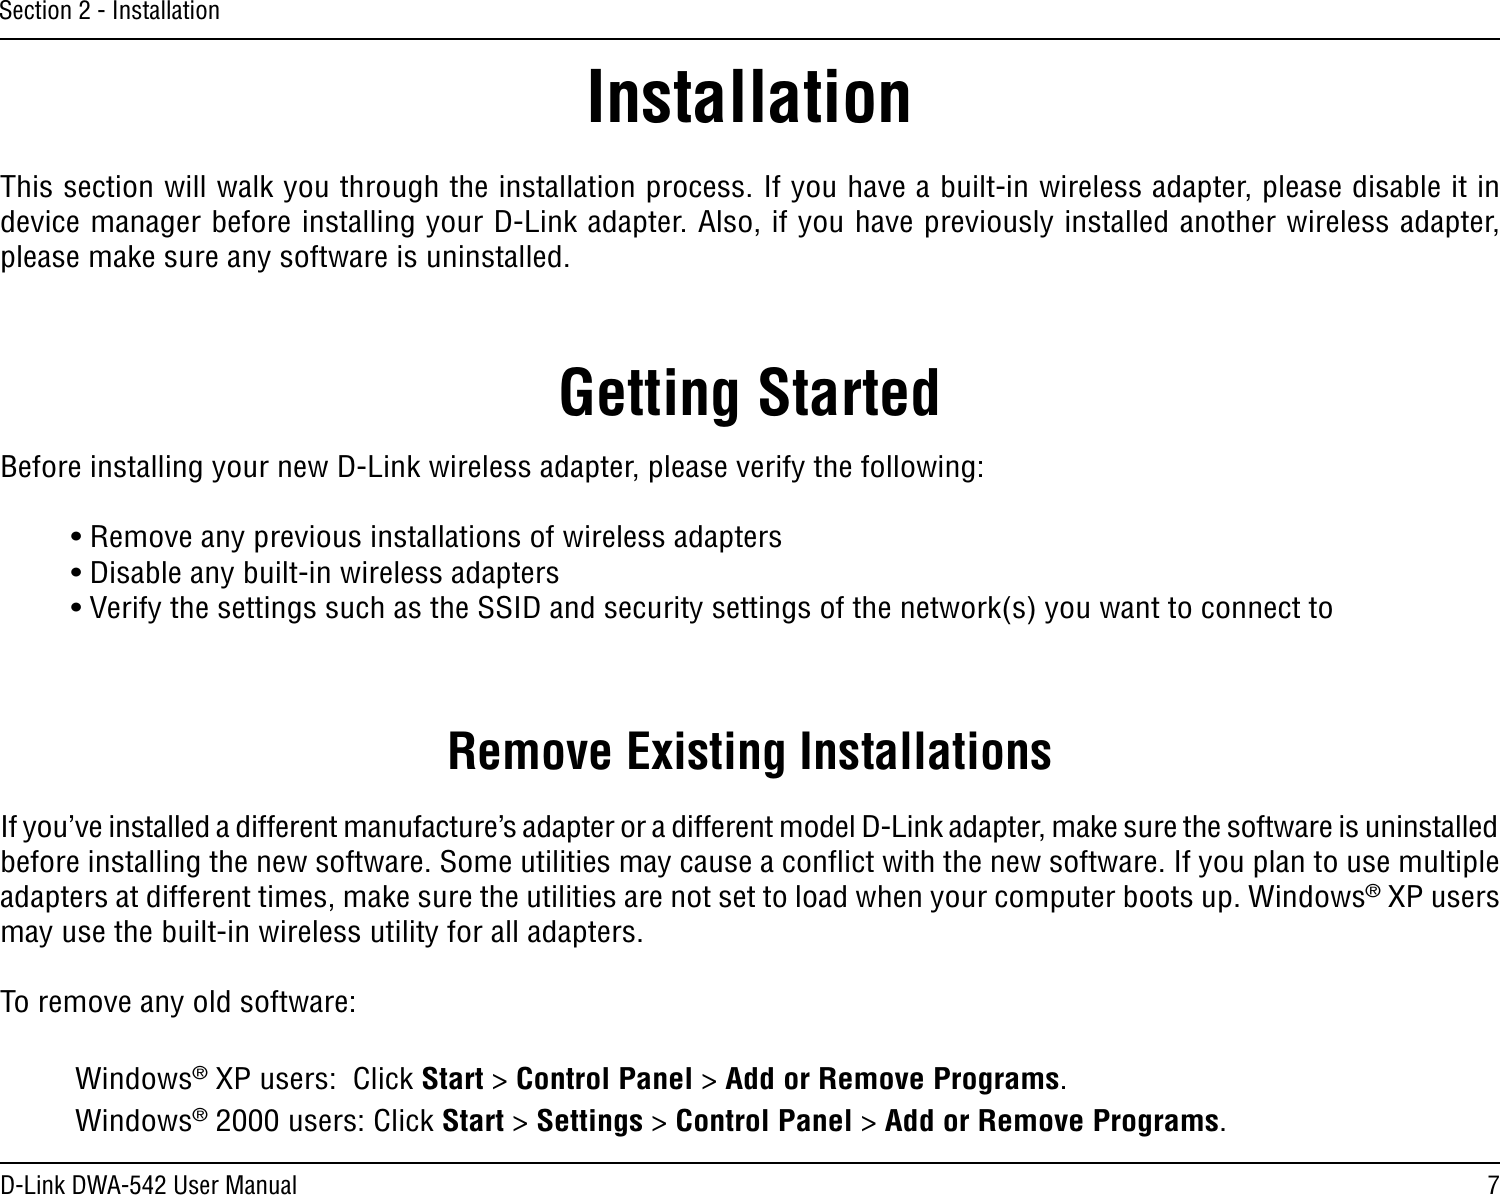 7D-Link DWA-542 User ManualSection 2 - InstallationGetting StartedInstallationThis section will walk you through the installation process. If you have a built-in wireless adapter, please disable it in device manager before installing your D-Link adapter. Also, if you have previously installed another wireless adapter, please make sure any software is uninstalled.Before installing your new D-Link wireless adapter, please verify the following:• Remove any previous installations of wireless adapters• Disable any built-in wireless adapters• Verify the settings such as the SSID and security settings of the network(s) you want to connect toRemove Existing InstallationsIf you’ve installed a different manufacture’s adapter or a different model D-Link adapter, make sure the software is uninstalled before installing the new software. Some utilities may cause a conﬂict with the new software. If you plan to use multiple adapters at different times, make sure the utilities are not set to load when your computer boots up. Windows® XP users may use the built-in wireless utility for all adapters.To remove any old software:  Windows® XP users:  Click Start &gt; Control Panel &gt; Add or Remove Programs.   Windows® 2000 users: Click Start &gt; Settings &gt; Control Panel &gt; Add or Remove Programs.